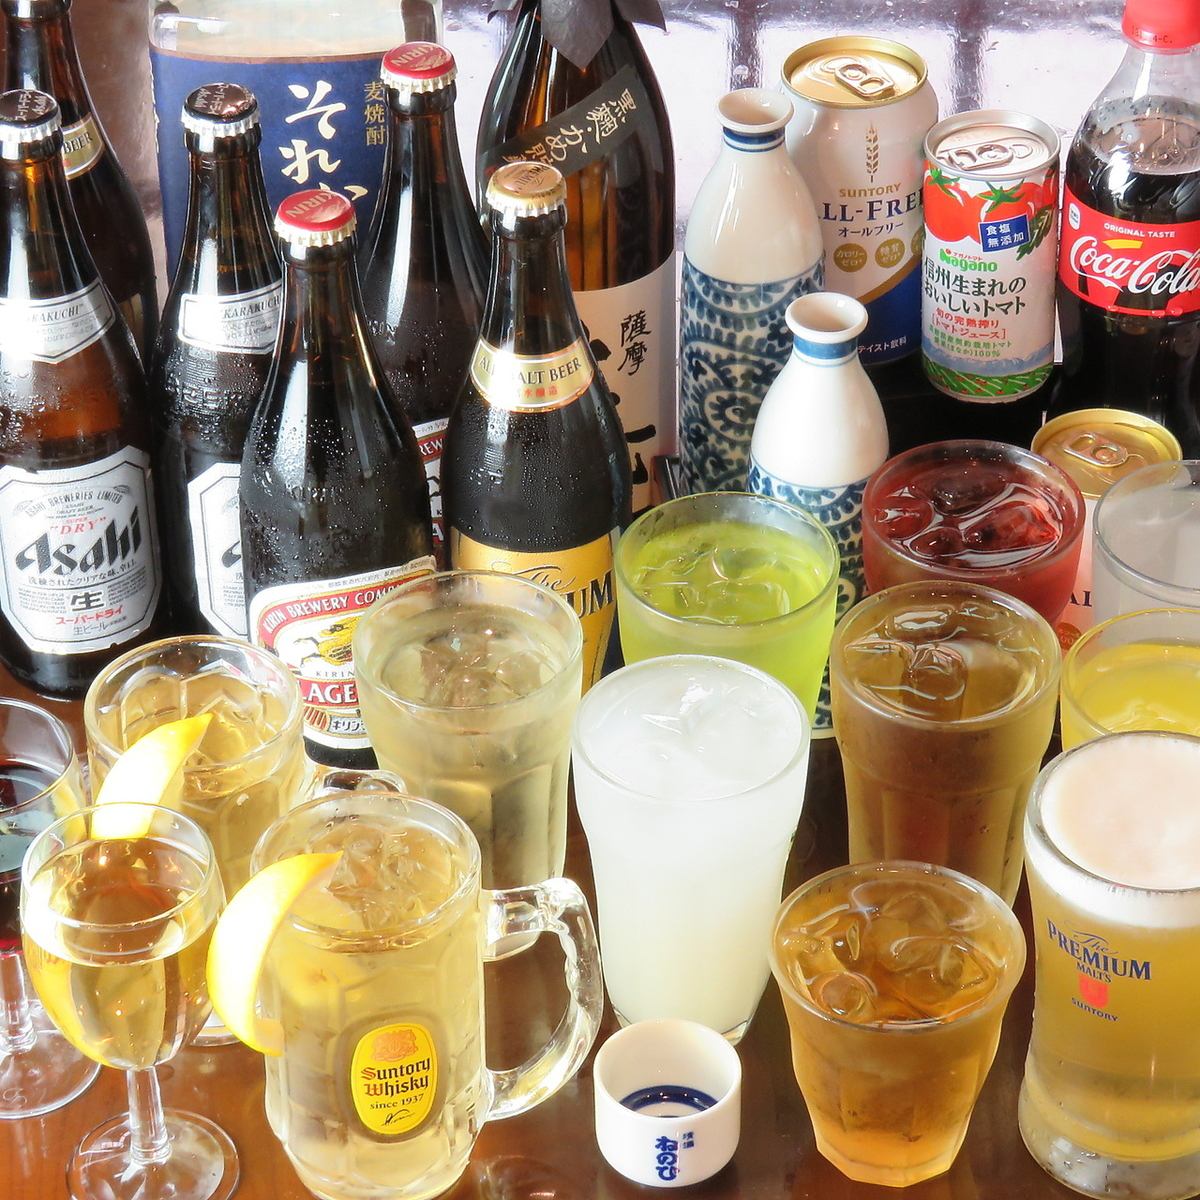 2 hours of all-you-can-drink included★Easy Nagoya Cochin course is only 4,000 yen with a coupon!